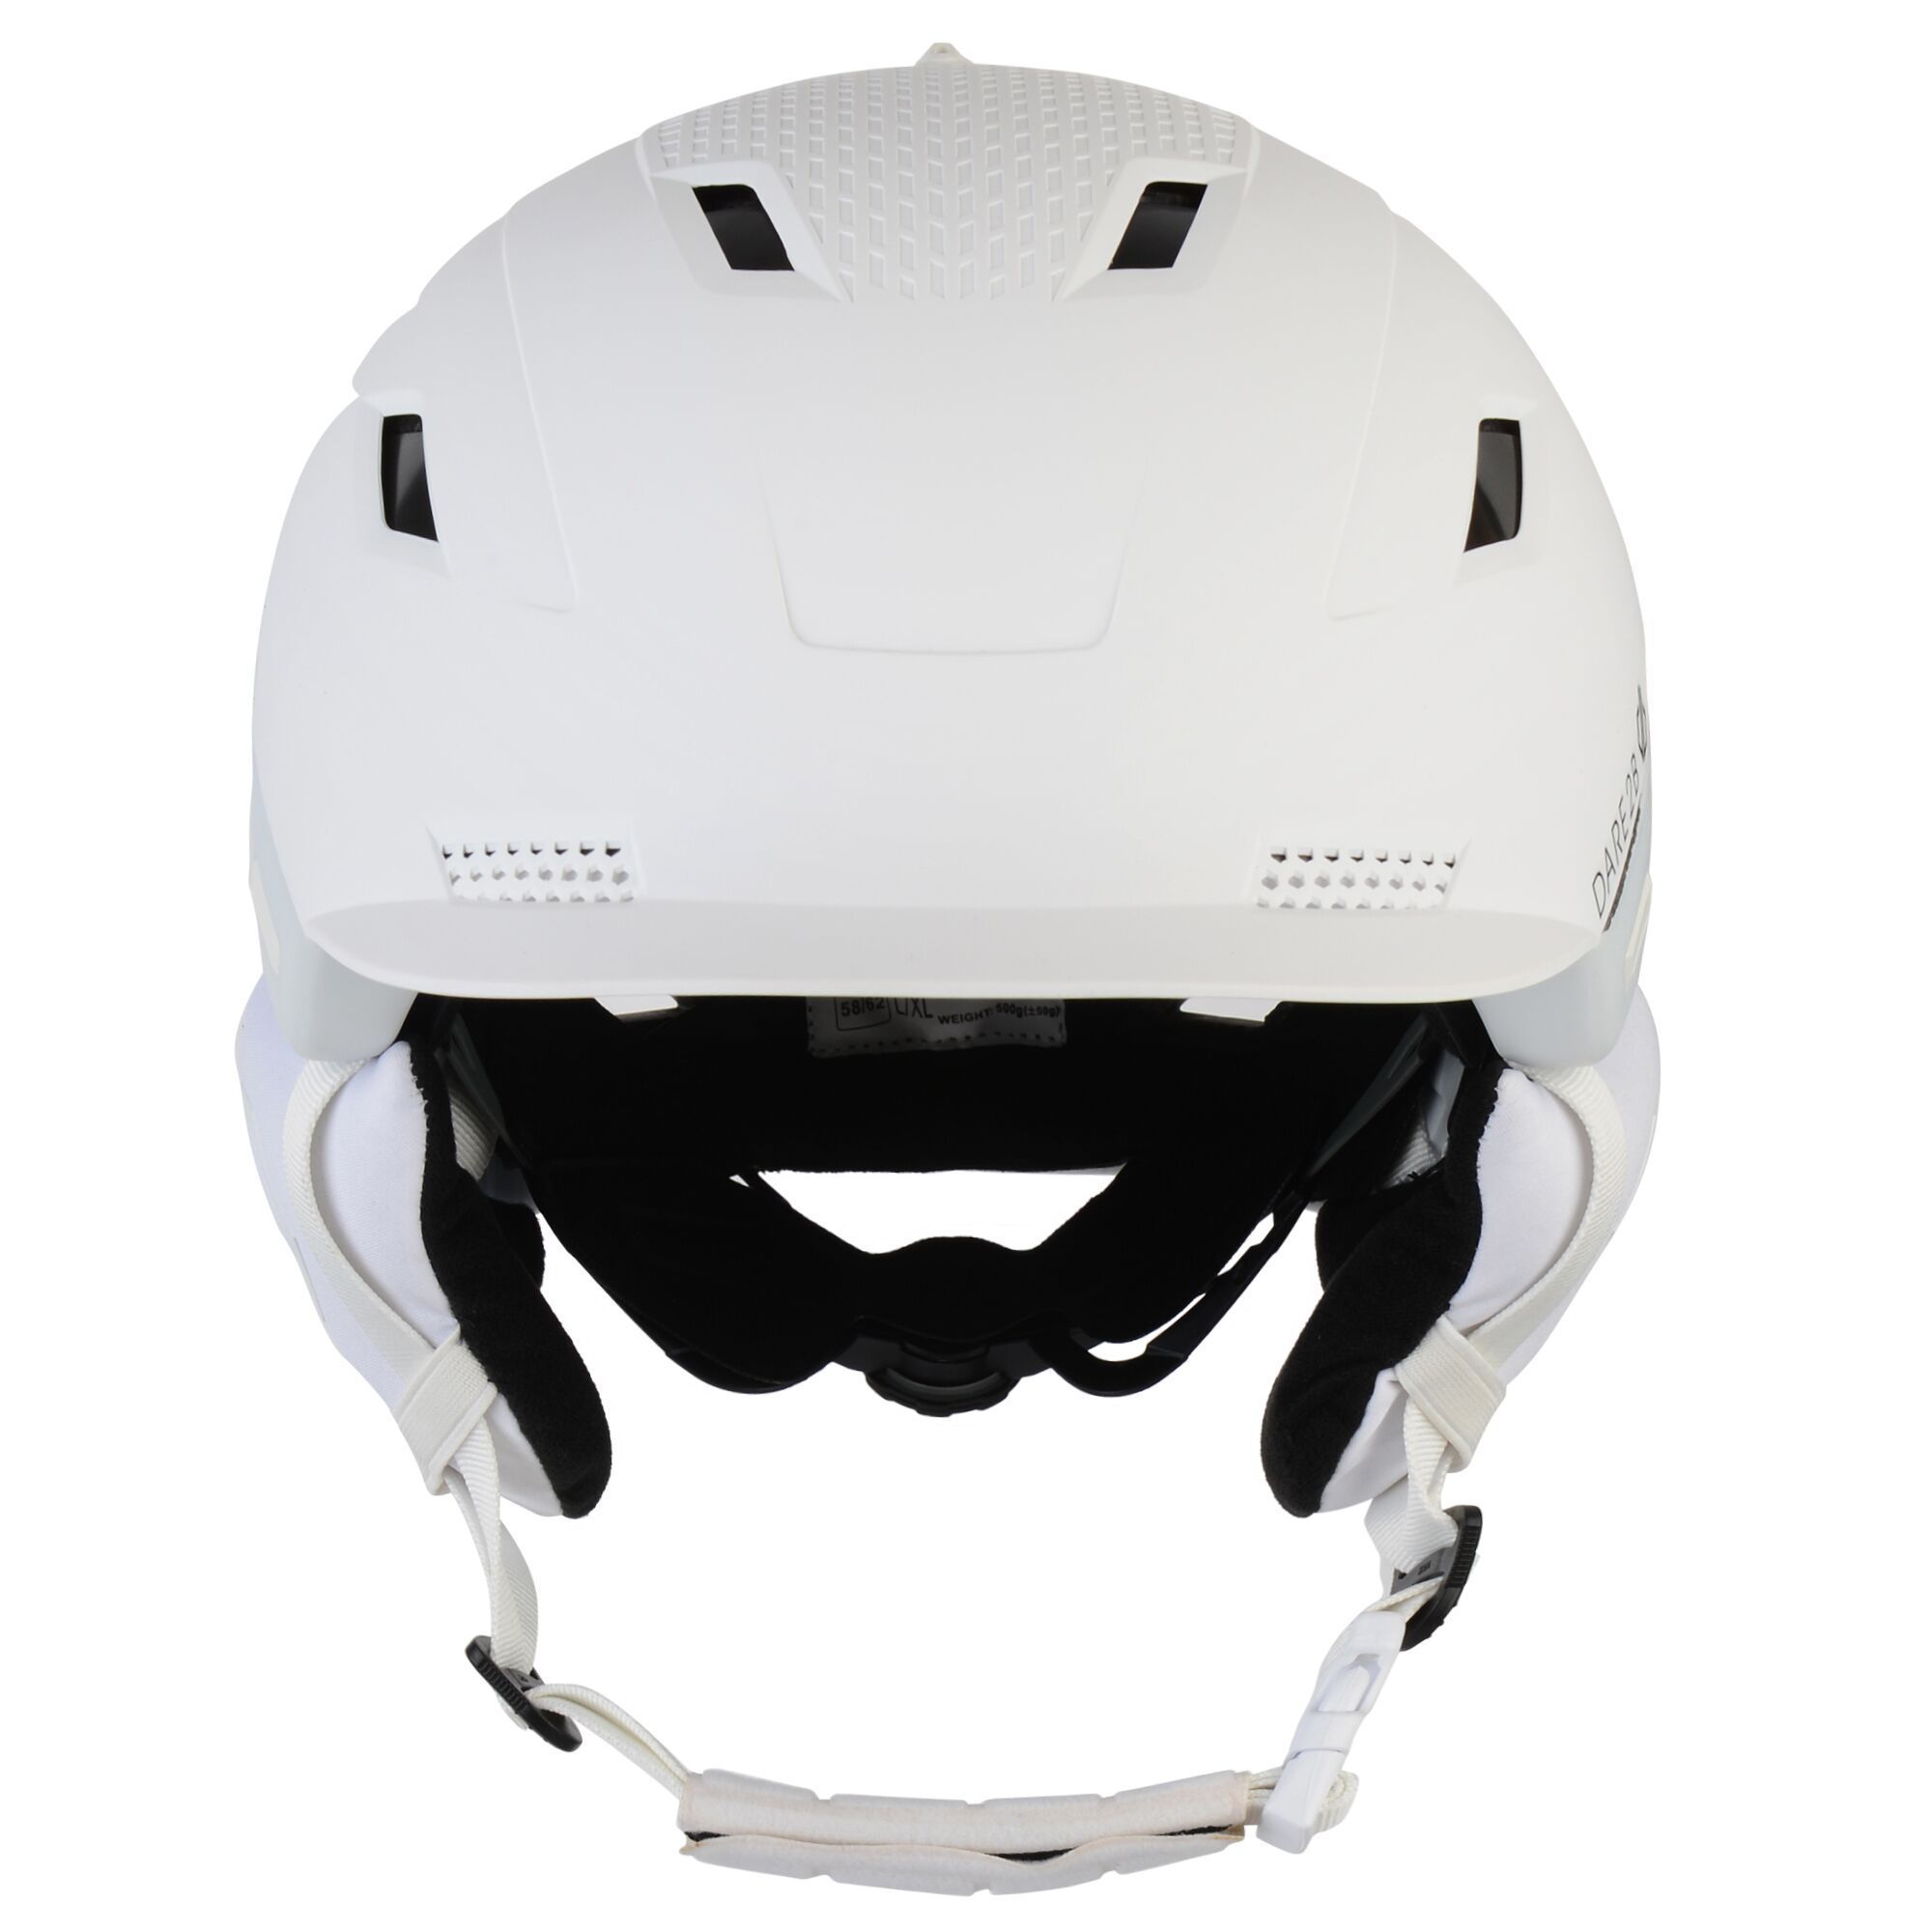 Material: 50% Polycarbonate, 50% Plastics. Hybird polycarbonate & ABS shell construction. Complies to CE EN1077 standards. In-mould, lightweight construction with fused EPS foam lining for excellent impact protection. Low-profile, adjustable air vents for quick and easy temperature regulation. Removable goggle clip for keeping goggles in position whilst on the slope. Size adjustment dial system for easy helmet fitting. S/M: 54-58cm, L/XL: 58-62cm.